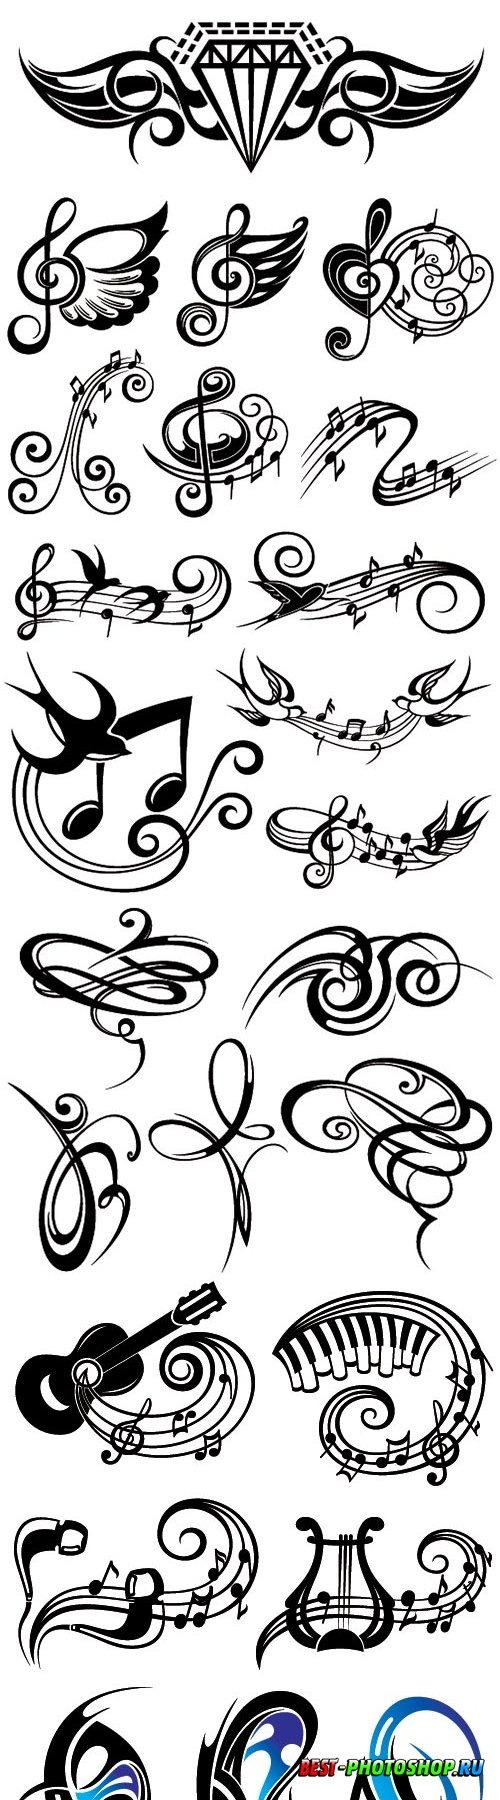 Tattoo patterns in vector